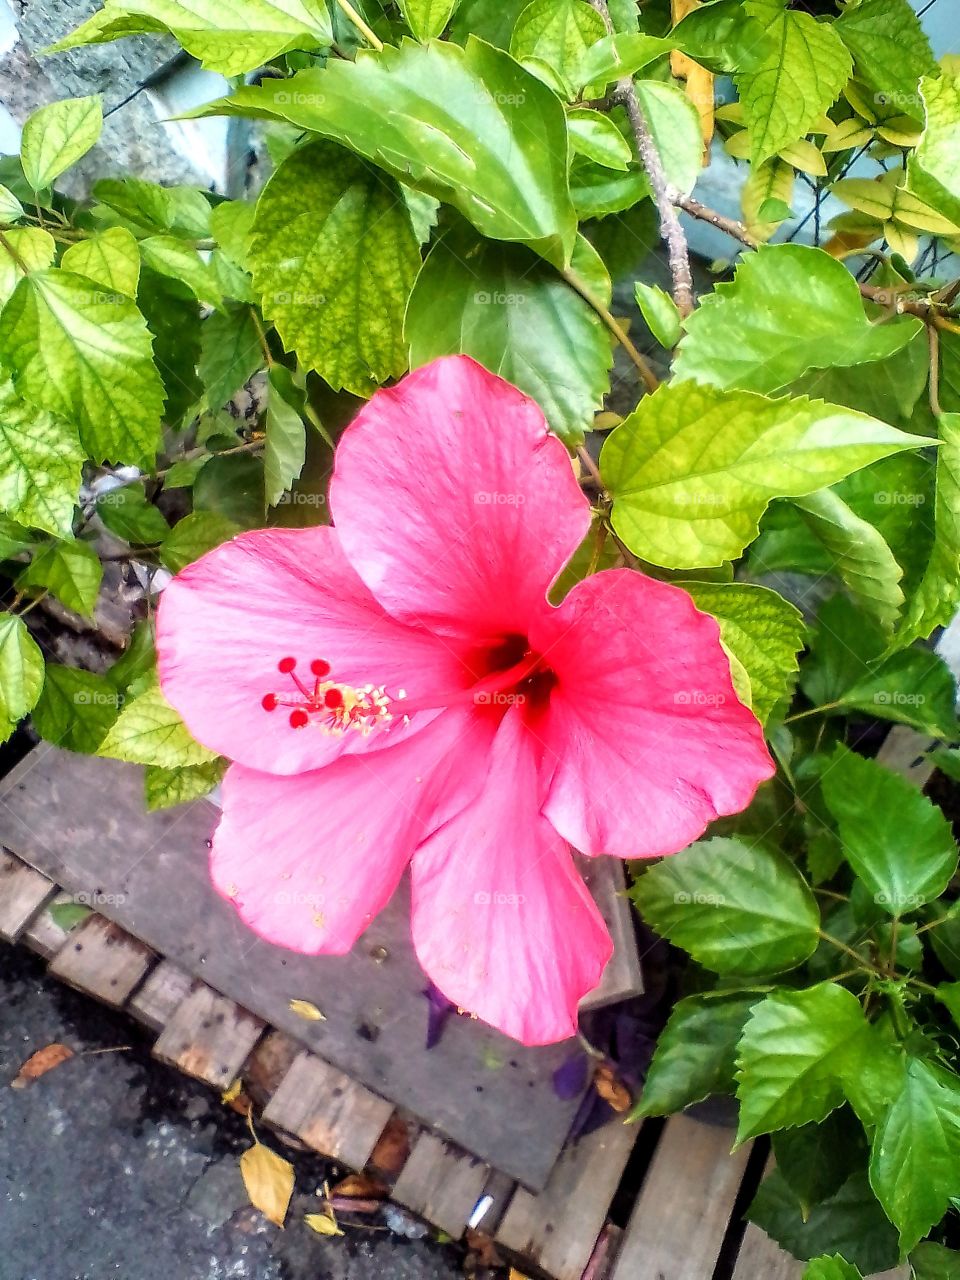 The hibiscus is beautiful flower